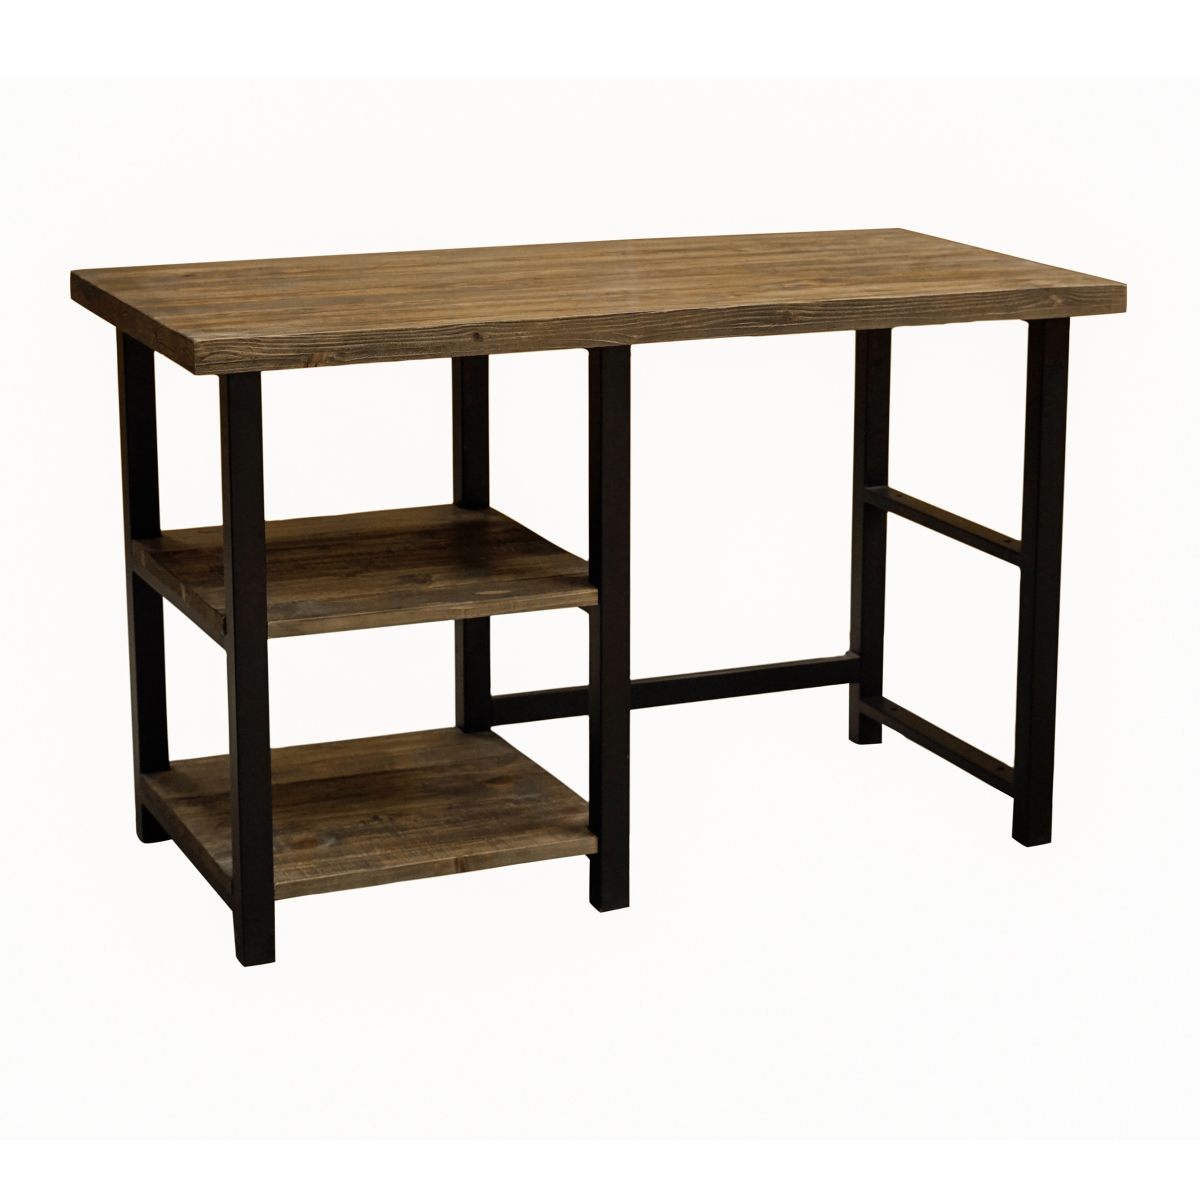 Picture of Alaterre AMBA0620 48 in. Pomona Metal & Solid Wood Desk with 2 Shelves